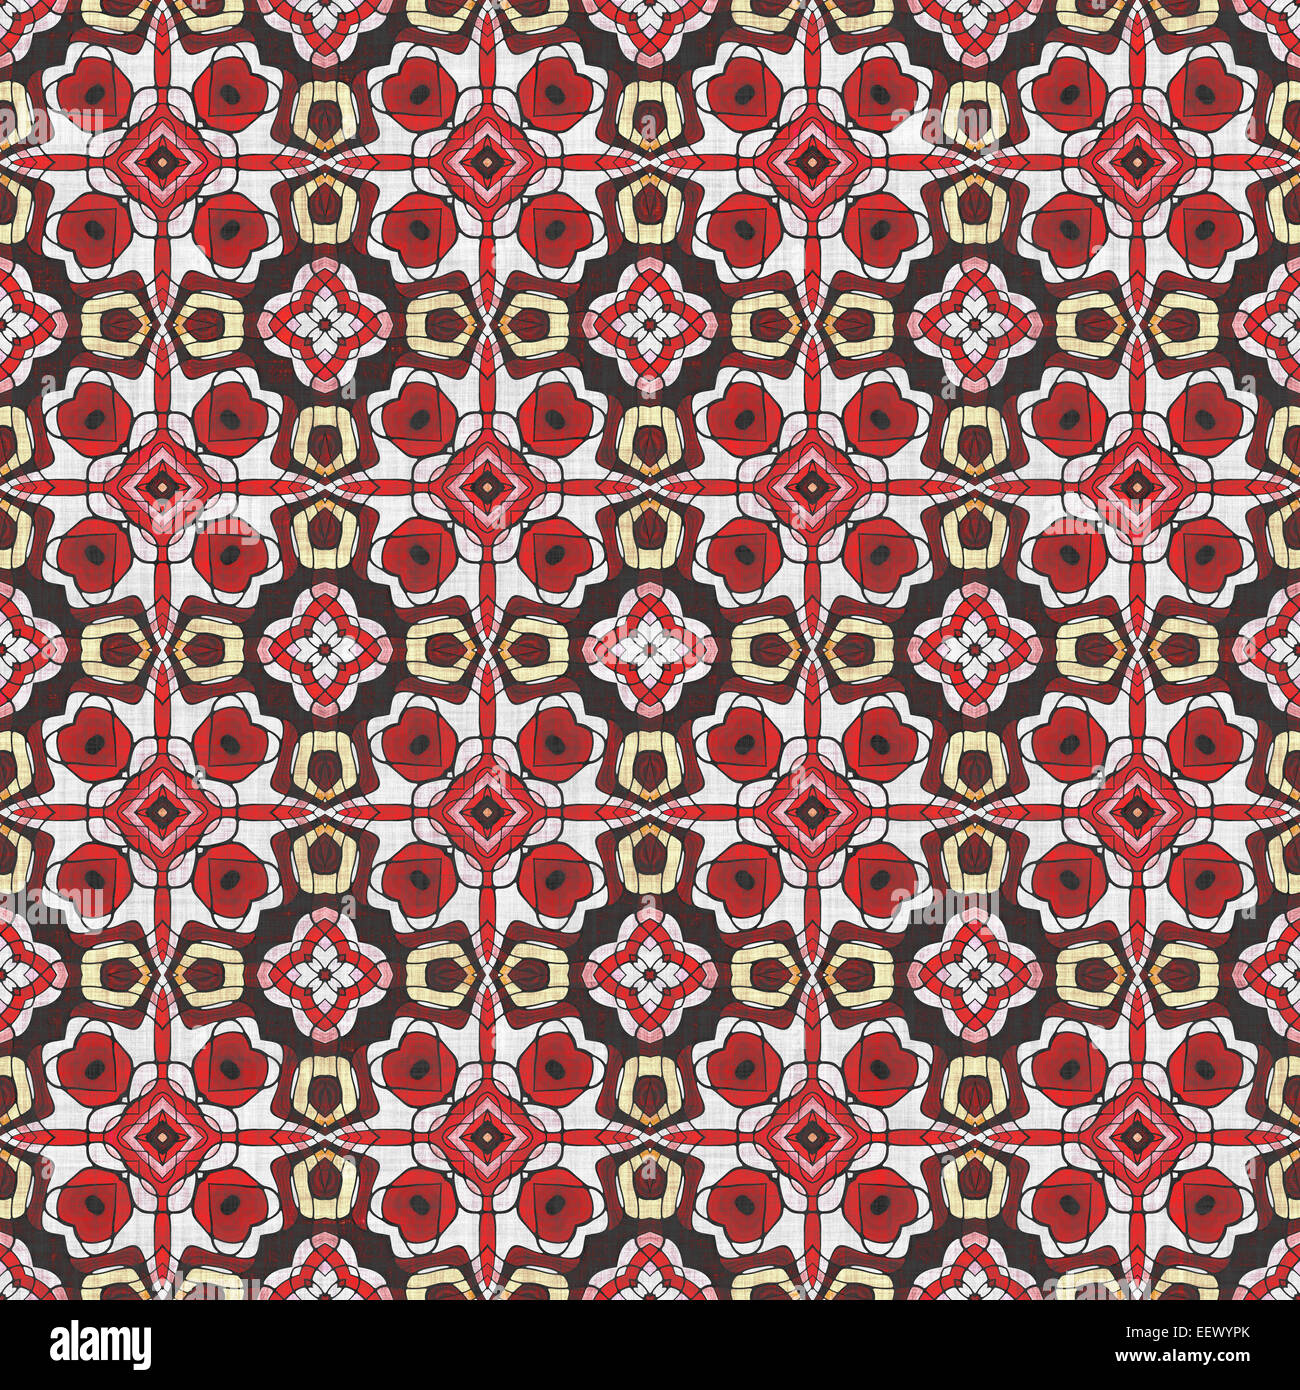 This fabric material with stamped red and brown patterns Stock Photo